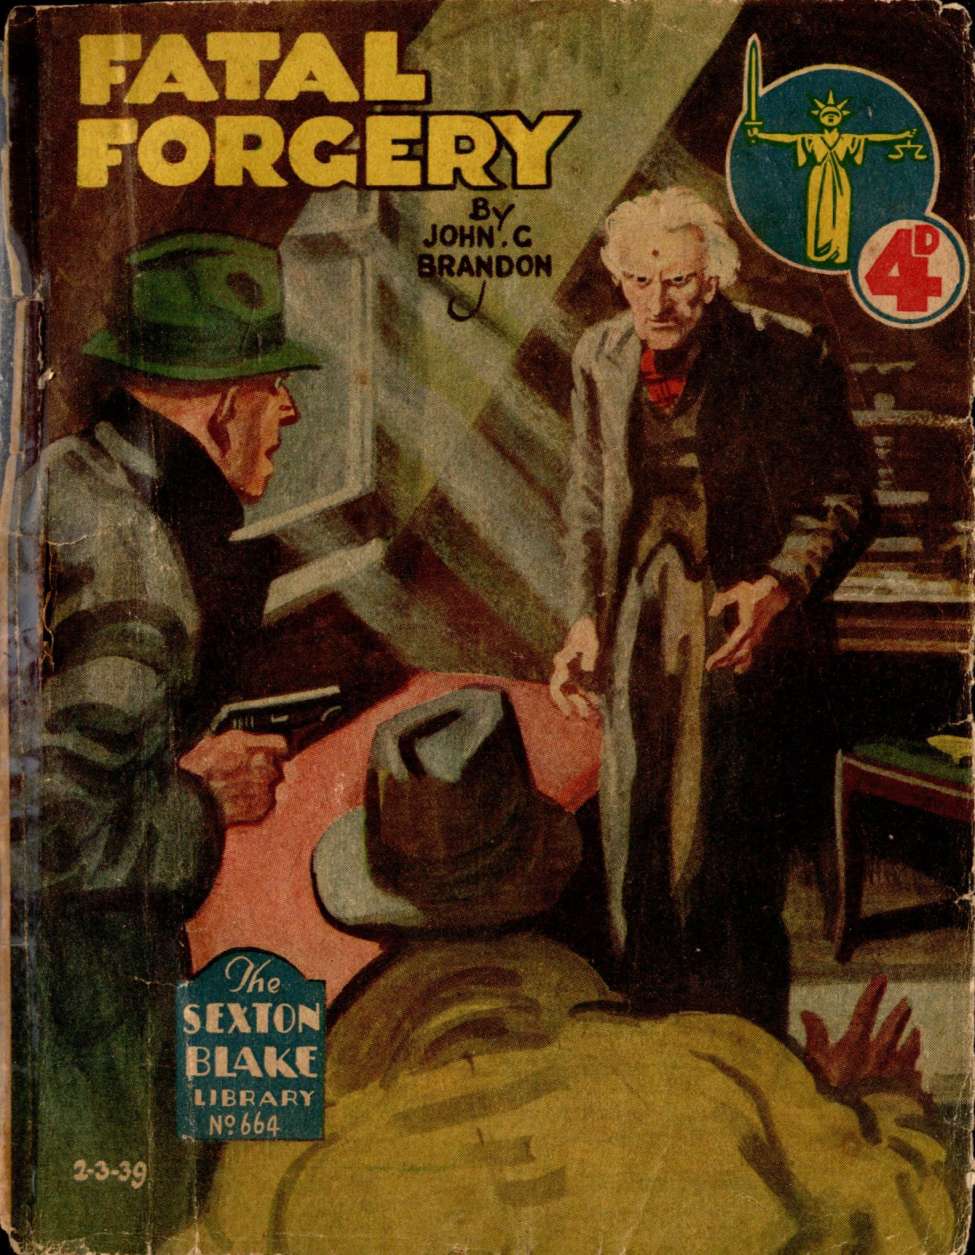 Book Cover For Sexton Blake Library S2 664 - Fatal Forgery